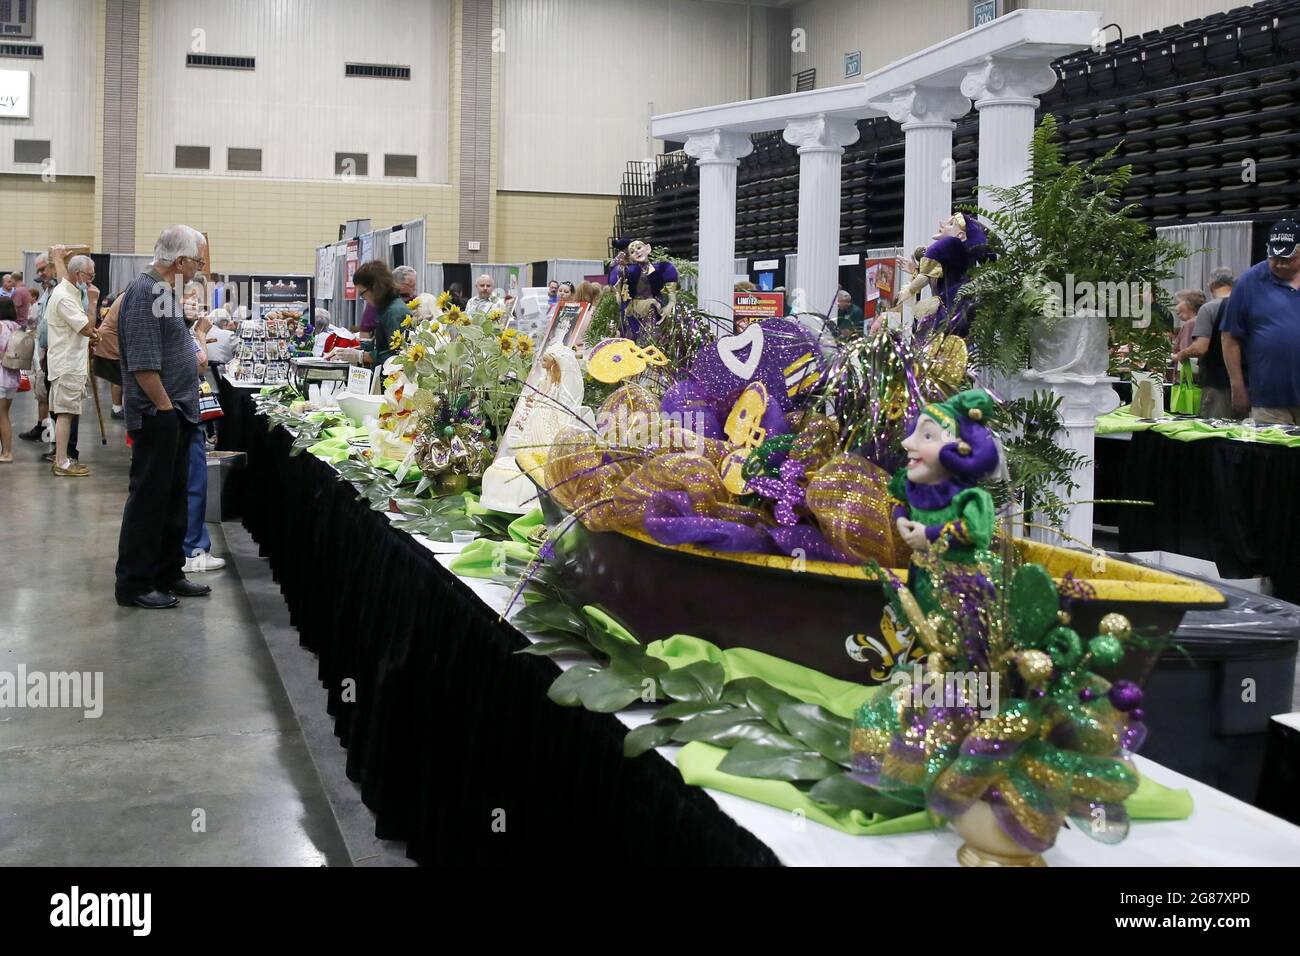 Houma, USA. 17th July, 2021. People visit the annual Bayou Home Show and Cannata's Festival of Food in Houma, Louisiana, the United States, on July 17, 2021. The home show and festival of food is held on Saturday and Sunday in Houma, showcasing the latest products and services in kitchens, bathrooms, siding and solar products. Credit: Lan Wei/Xinhua/Alamy Live News Stock Photo